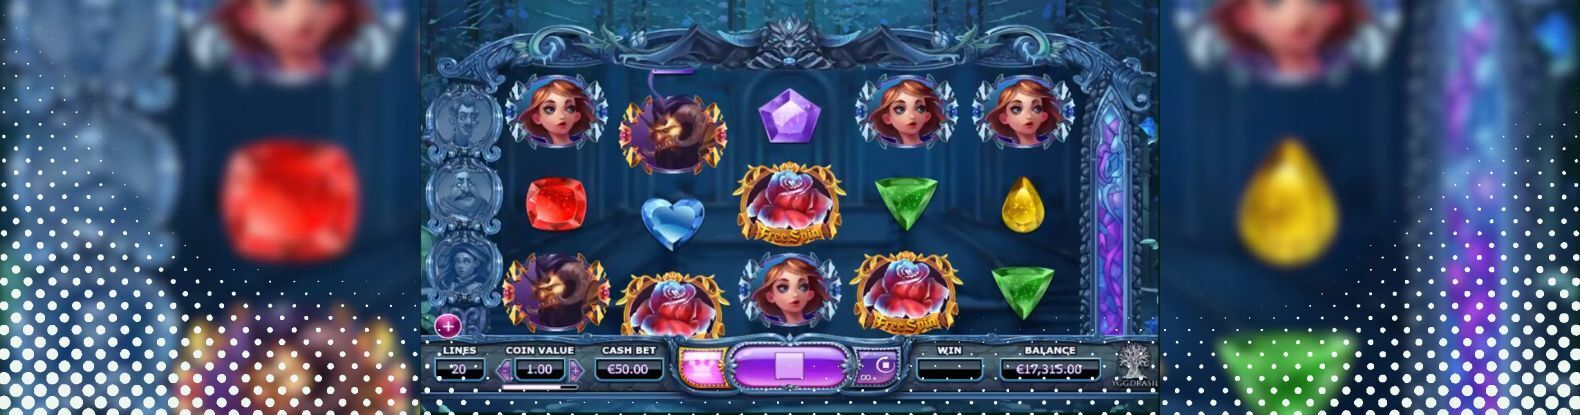 This is a screenshot of Beauty and the Beast Online Pokies Game by Yggdrasil